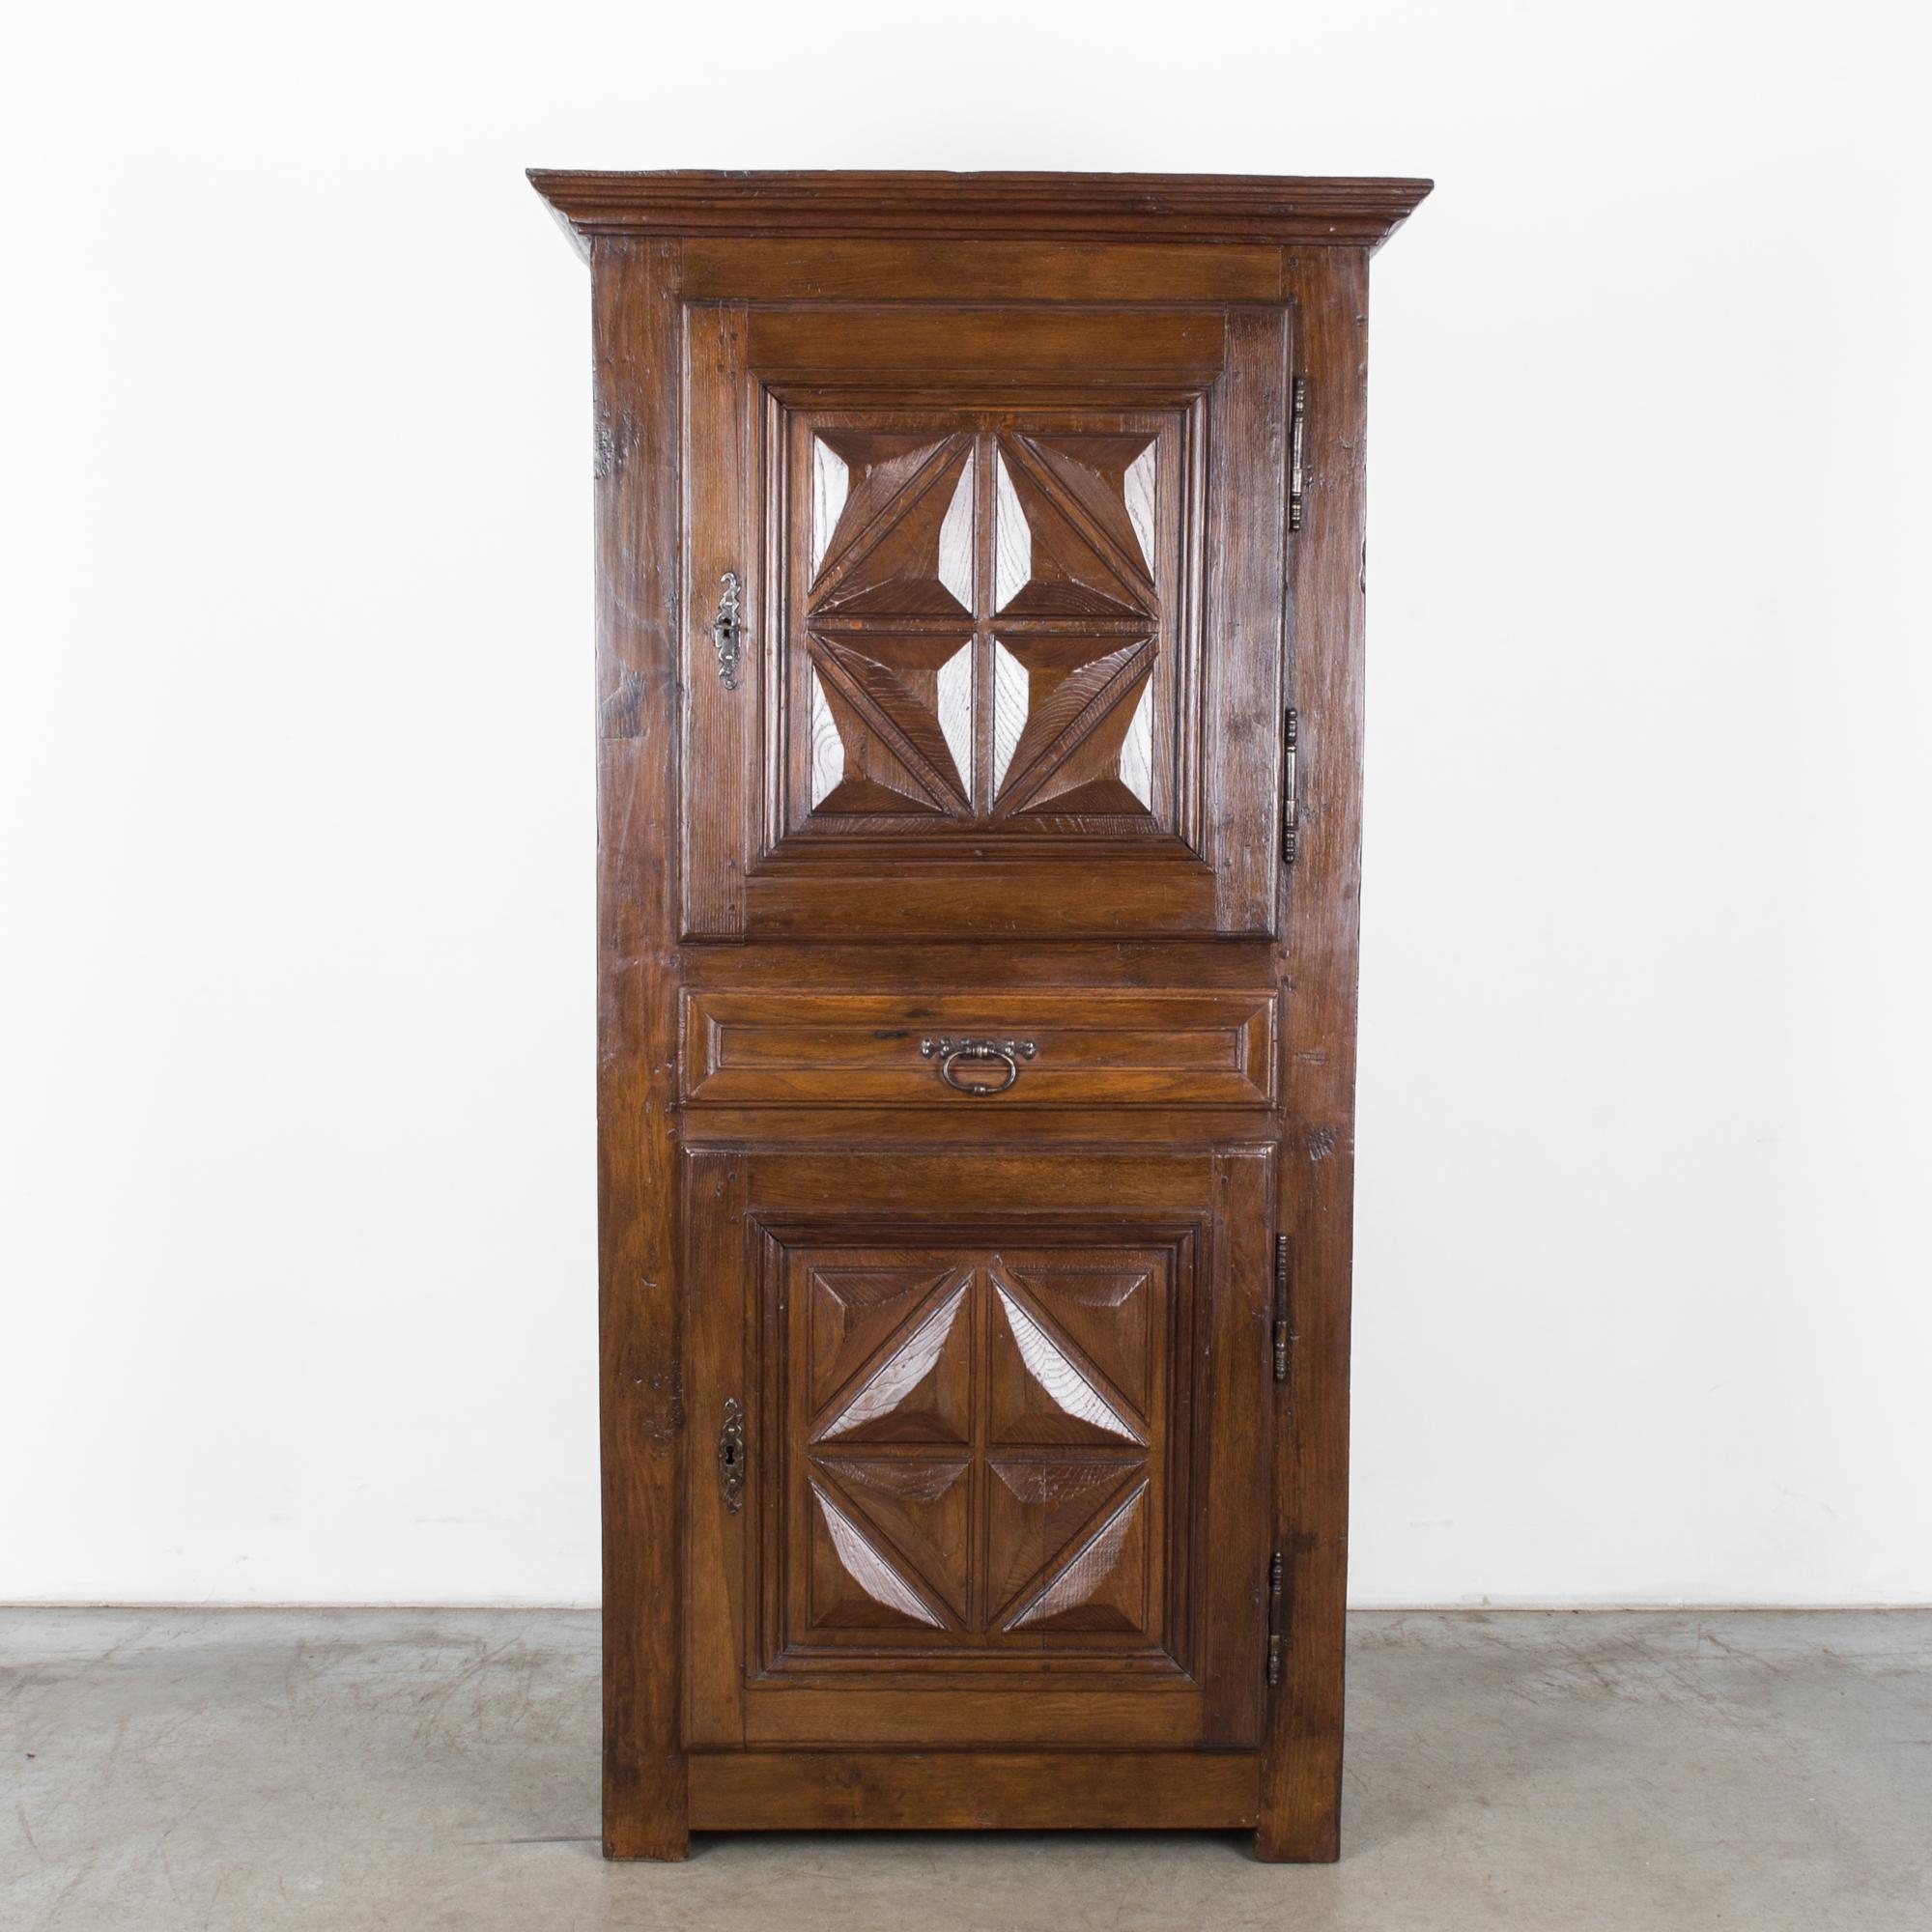 A tall wooden cabinet from France, circa 1880. An upper and a lower door are ornamented with a striking design of facetted raised panels. The jewel-like impression this creates is accentuated by the deep tone and rich polish of the wood. The doors